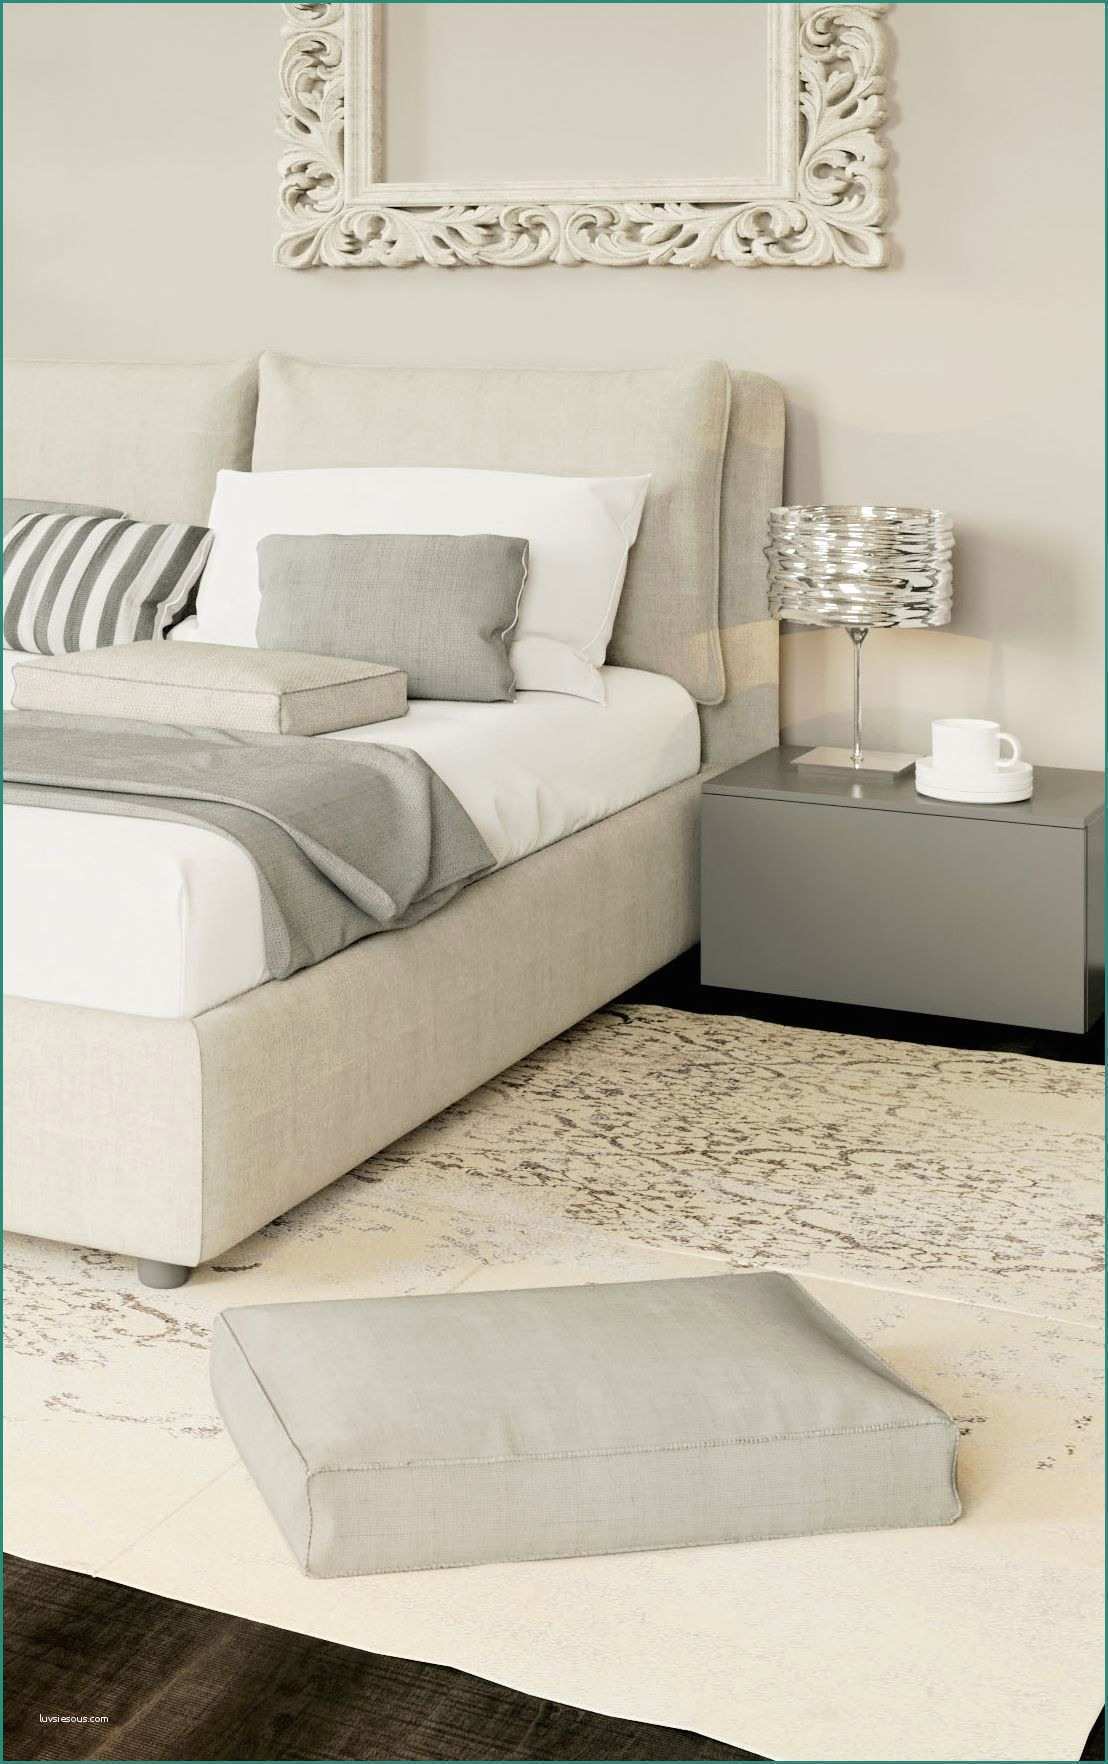 Letto Contenitore Flou E Luxury Details Grey and White Lacasamoderna Beds Sweetdreams